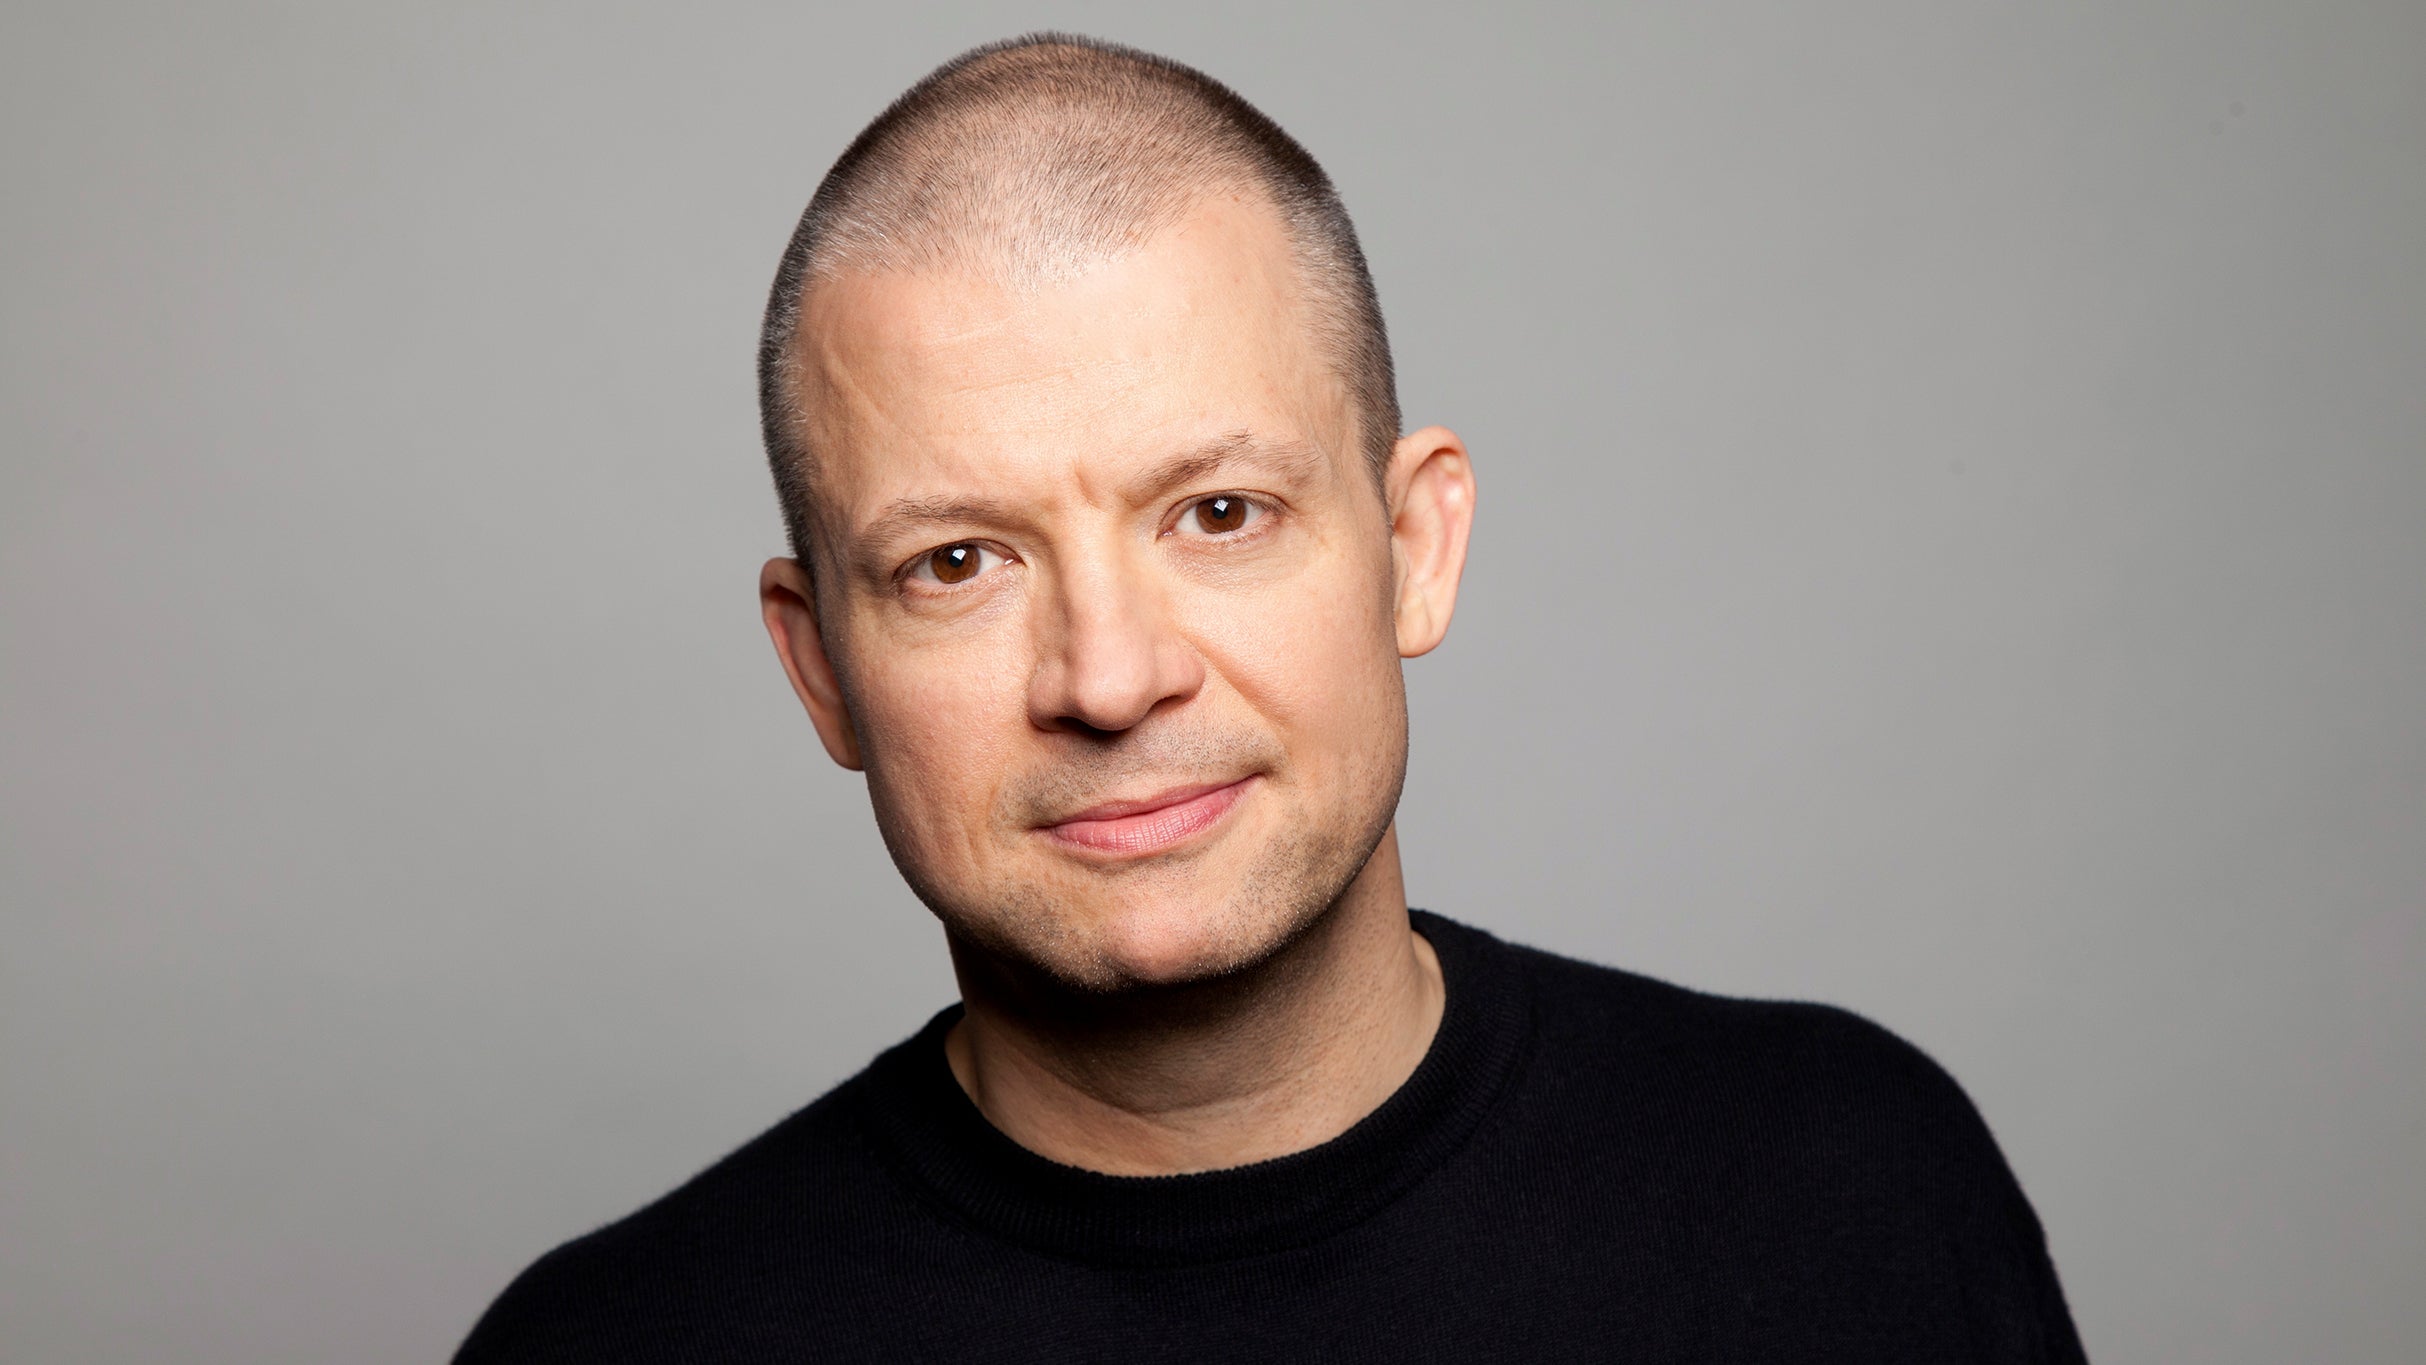 Jim Norton: Now You Know in Houston promo photo for Official Platinum Onsale presale offer code